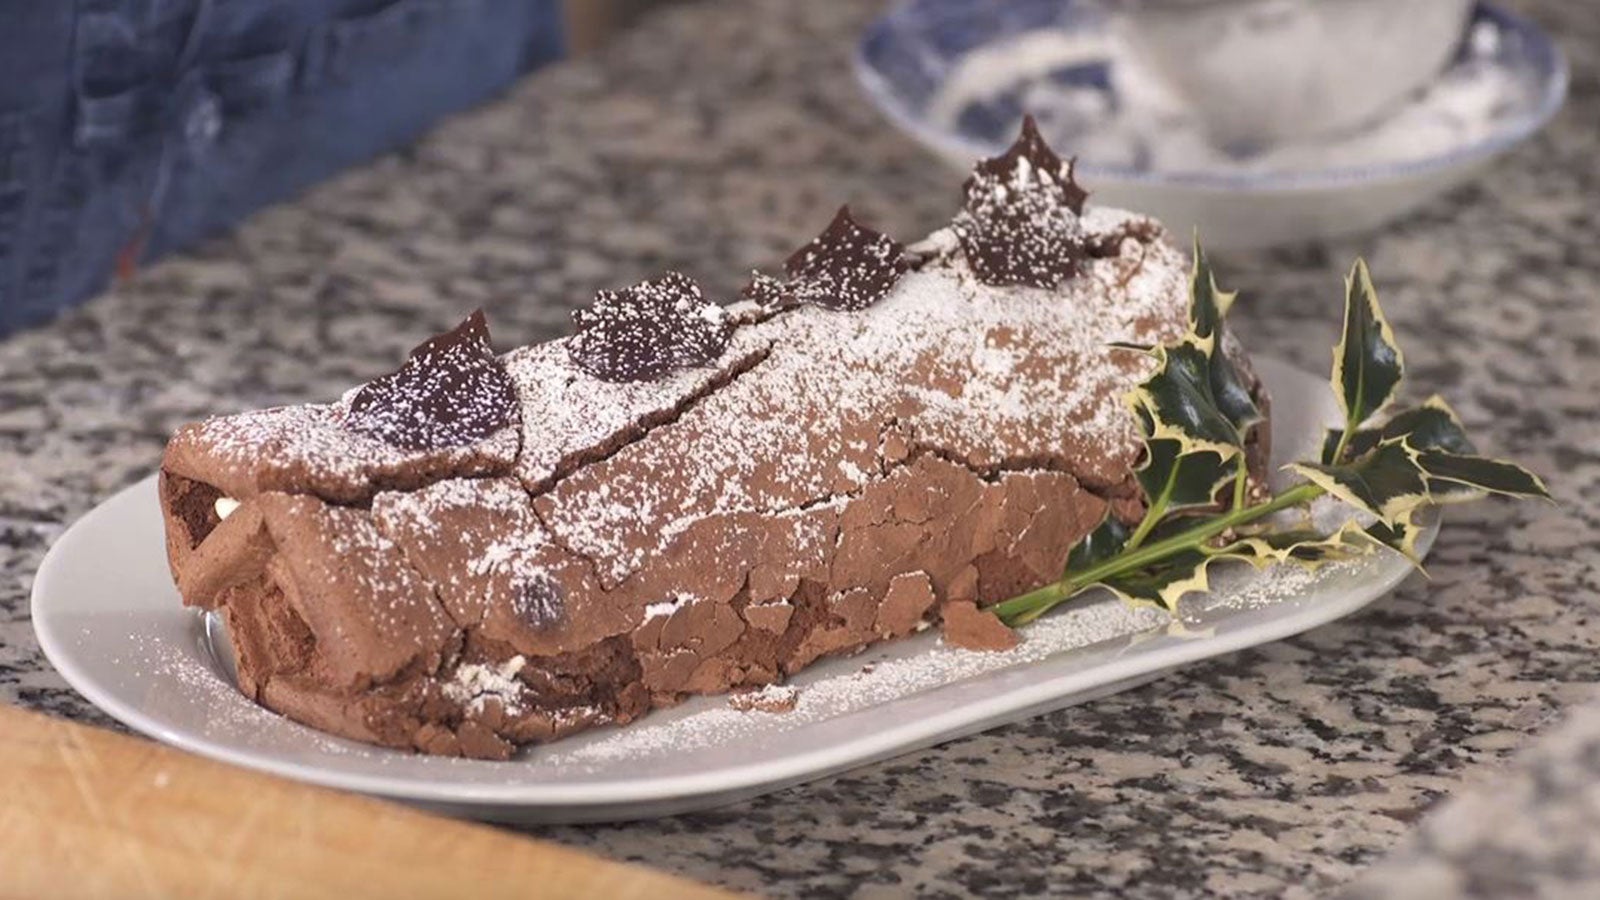 A chocolate Yule Log decorated with chocolate leaves, icing sugar and with ivy leaves.